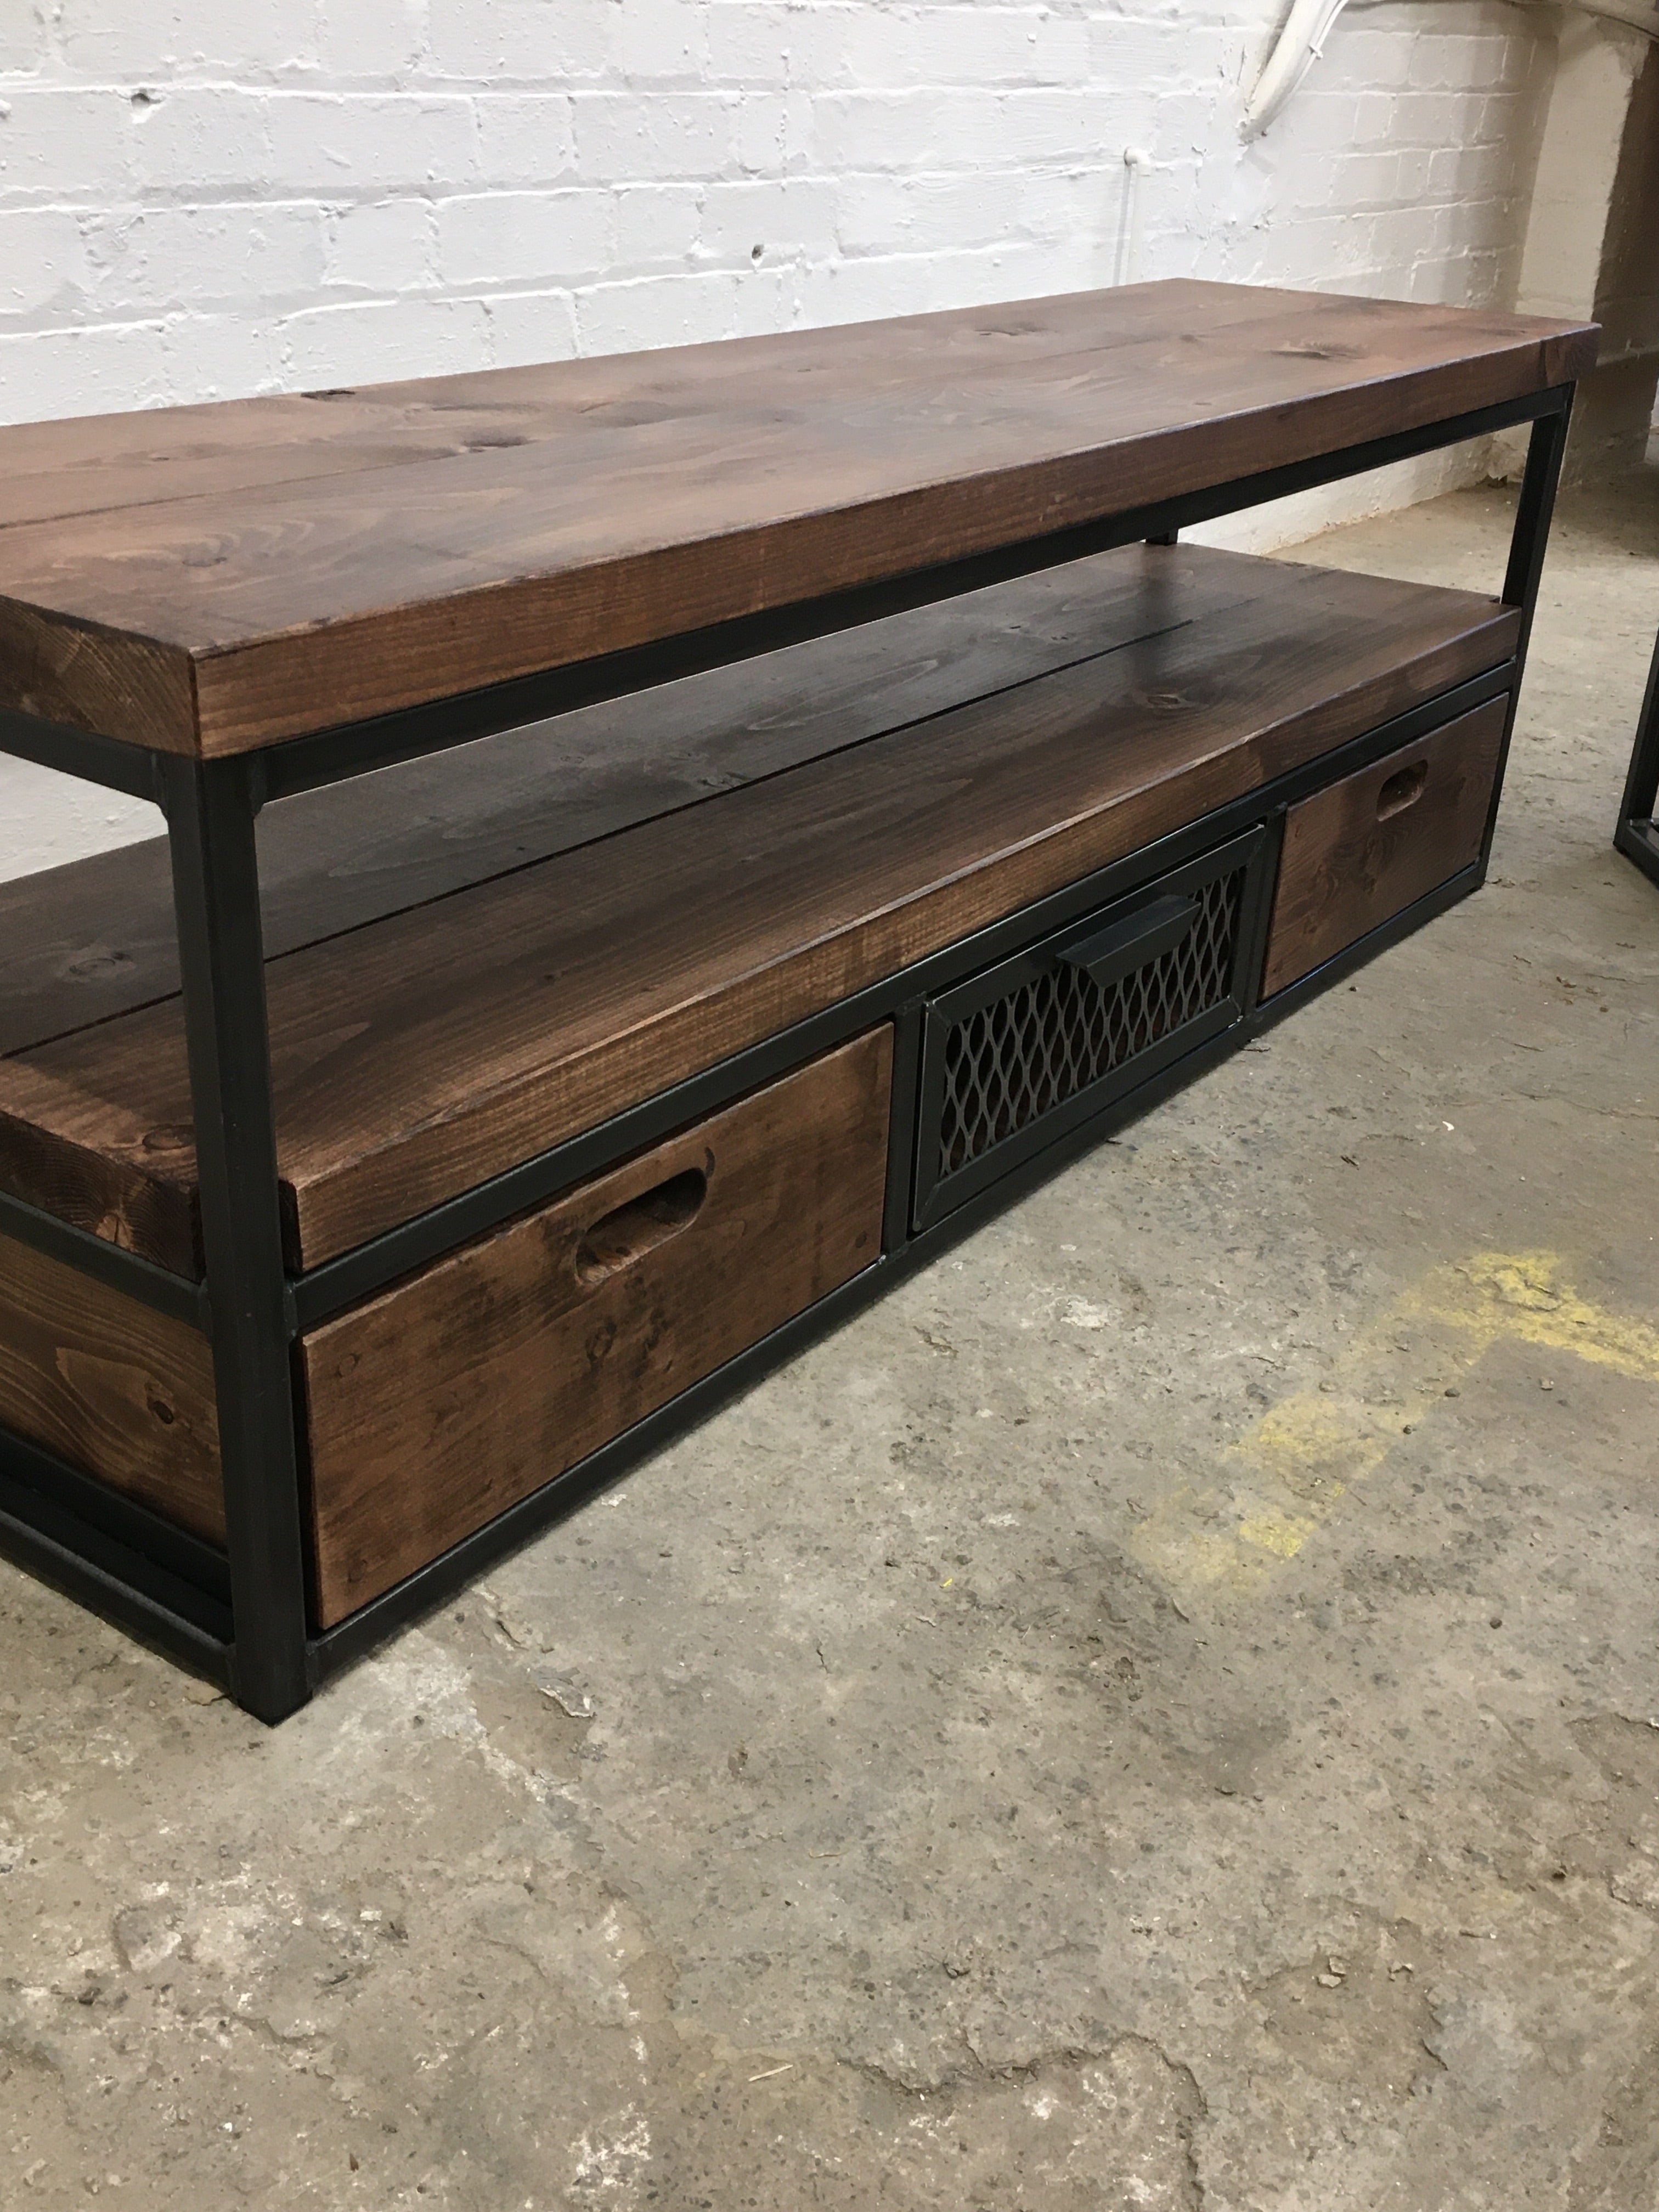 Rustic & Industrial TV Unit Stand with drawers Rustic sofa tables C shaped RSD Furniture   